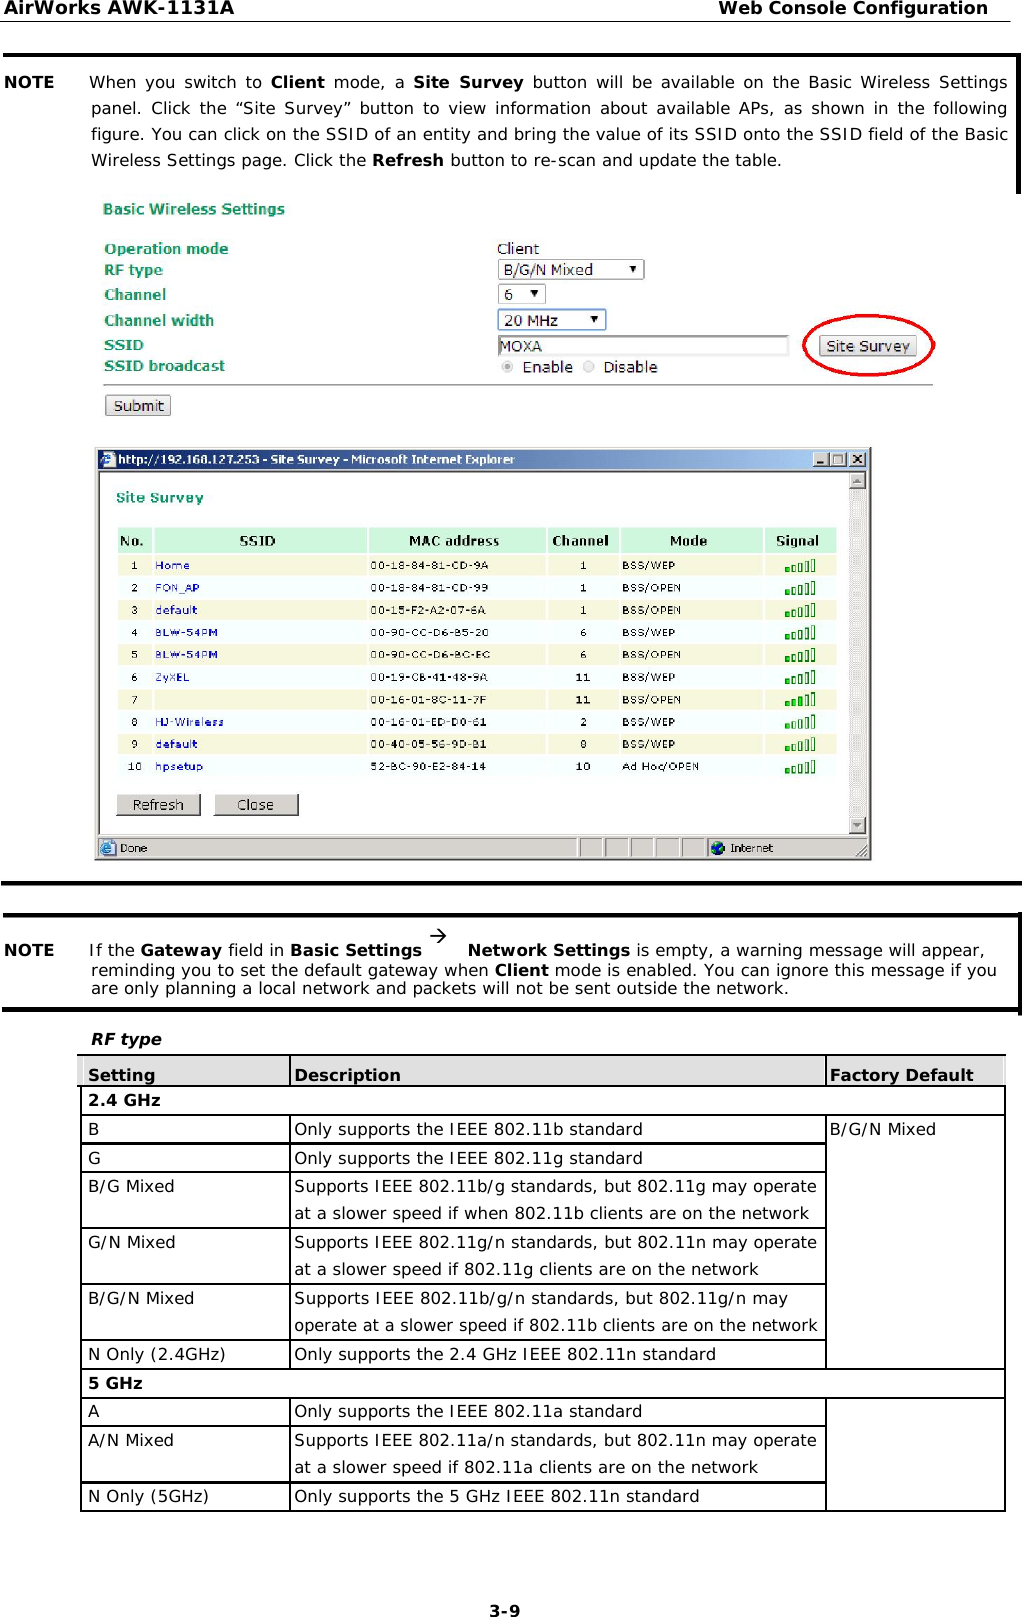 AirWorks AWK-1131A Web Console Configuration   NOTE When you switch to Client mode, a Site Survey button will be available on the Basic Wireless Settings panel. Click the “Site Survey” button to view information about available APs, as shown in the following figure. You can click on the SSID of an entity and bring the value of its SSID onto the SSID field of the Basic Wireless Settings page. Click the Refresh button to re-scan and update the table.                                     NOTE If the Gateway field in Basic Settings Network Settings is empty, a warning message will appear, reminding you to set the default gateway when Client mode is enabled. You can ignore this message if you are only planning a local network and packets will not be sent outside the network.  RF type    Setting Description Factory Default   2.4 GHz             B Only supports the IEEE 802.11b standard B/G/N Mixed          G Only supports the IEEE 802.11g standard            B/G Mixed Supports IEEE 802.11b/g standards, but 802.11g may operate      at a slower speed if when 802.11b clients are on the network            G/N Mixed Supports IEEE 802.11g/n standards, but 802.11n may operate      at a slower speed if 802.11g clients are on the network            B/G/N Mixed Supports IEEE 802.11b/g/n standards, but 802.11g/n may     operate at a slower speed if 802.11b clients are on the network            N Only (2.4GHz) Only supports the 2.4 GHz IEEE 802.11n standard            5 GHz             A Only supports the IEEE 802.11a standard            A/N Mixed Supports IEEE 802.11a/n standards, but 802.11n may operate      at a slower speed if 802.11a clients are on the network            N Only (5GHz) Only supports the 5 GHz IEEE 802.11n standard             3-9 